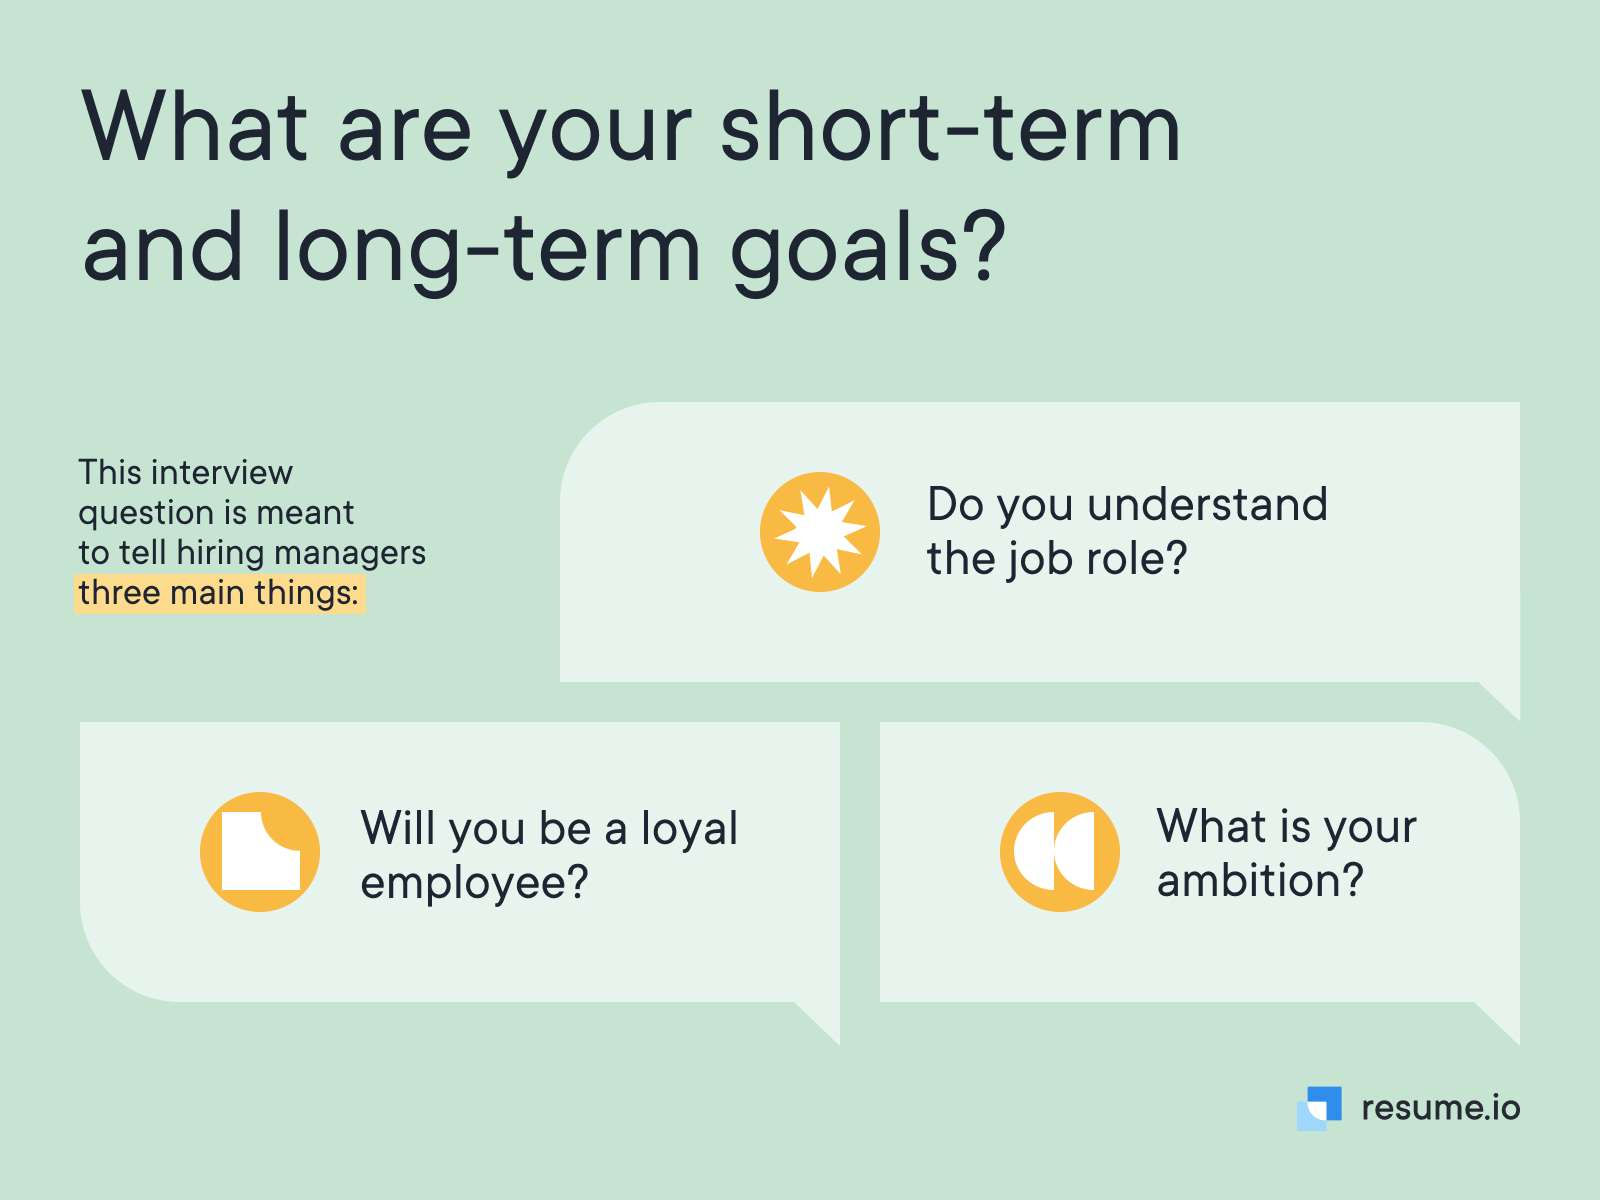 What are your short-term and long-term goals